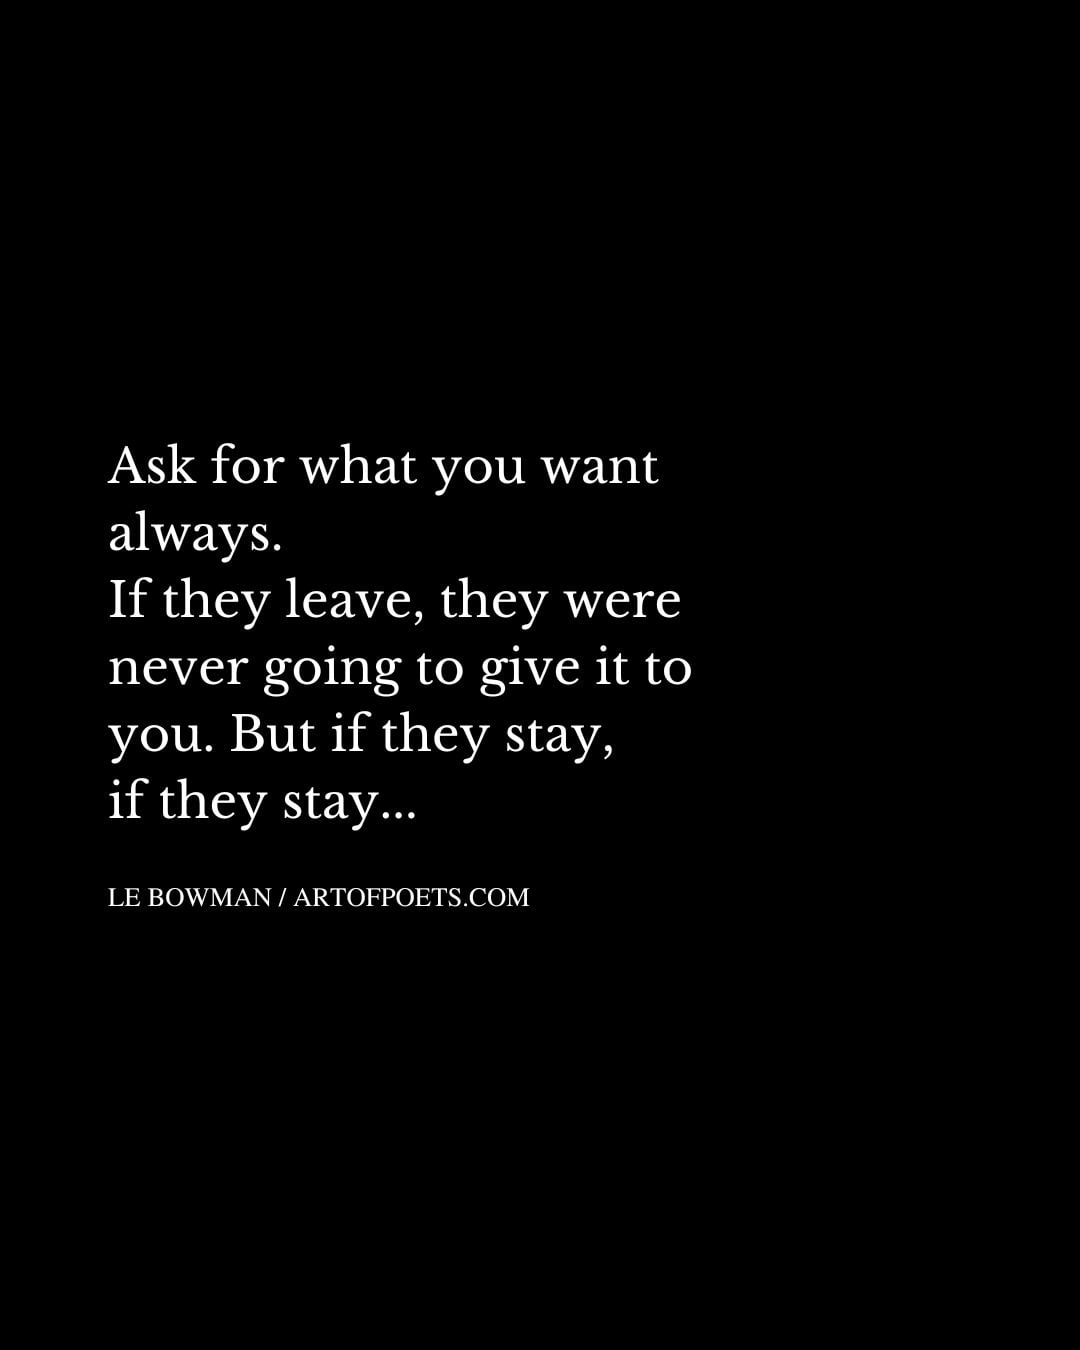 Ask for what you want always. If they leave they were never going to give it to you. But if they stay if they stay